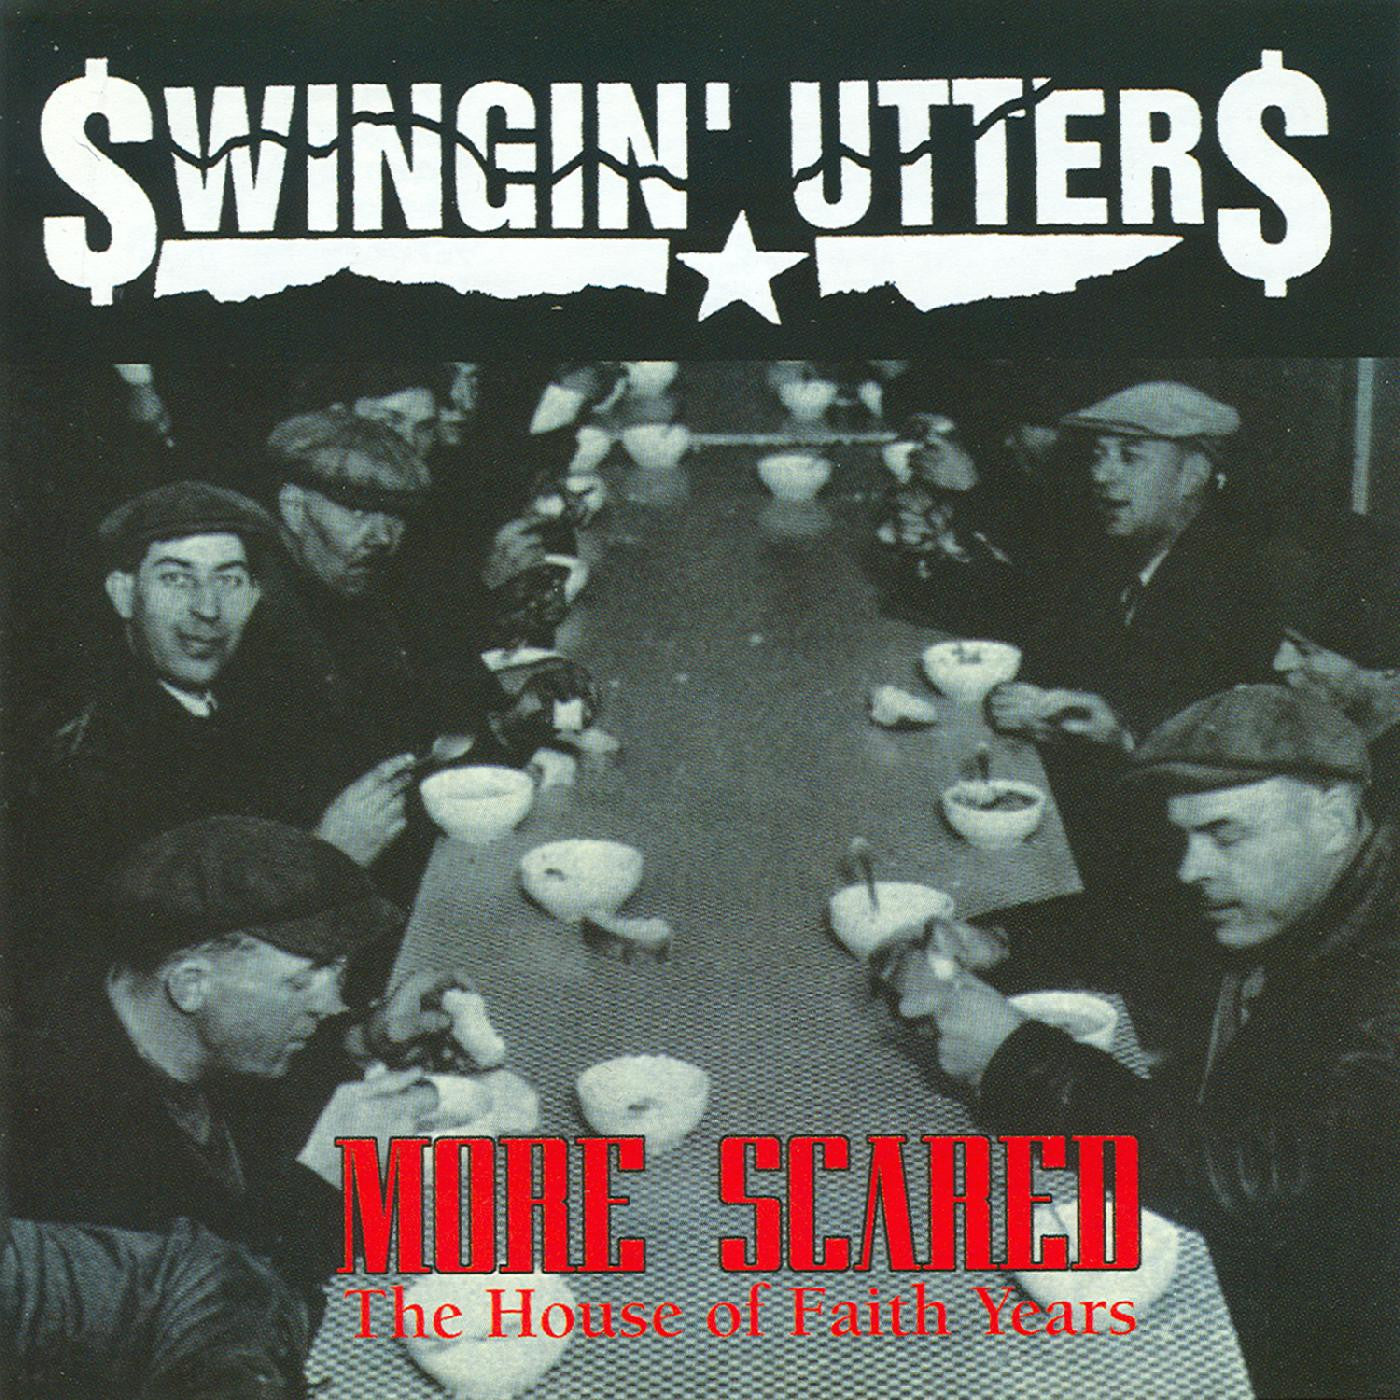 SWINGIN UTTERS - MORE SCARED: THE HOUSE OF FAITH OF YEARS Vinyl LP